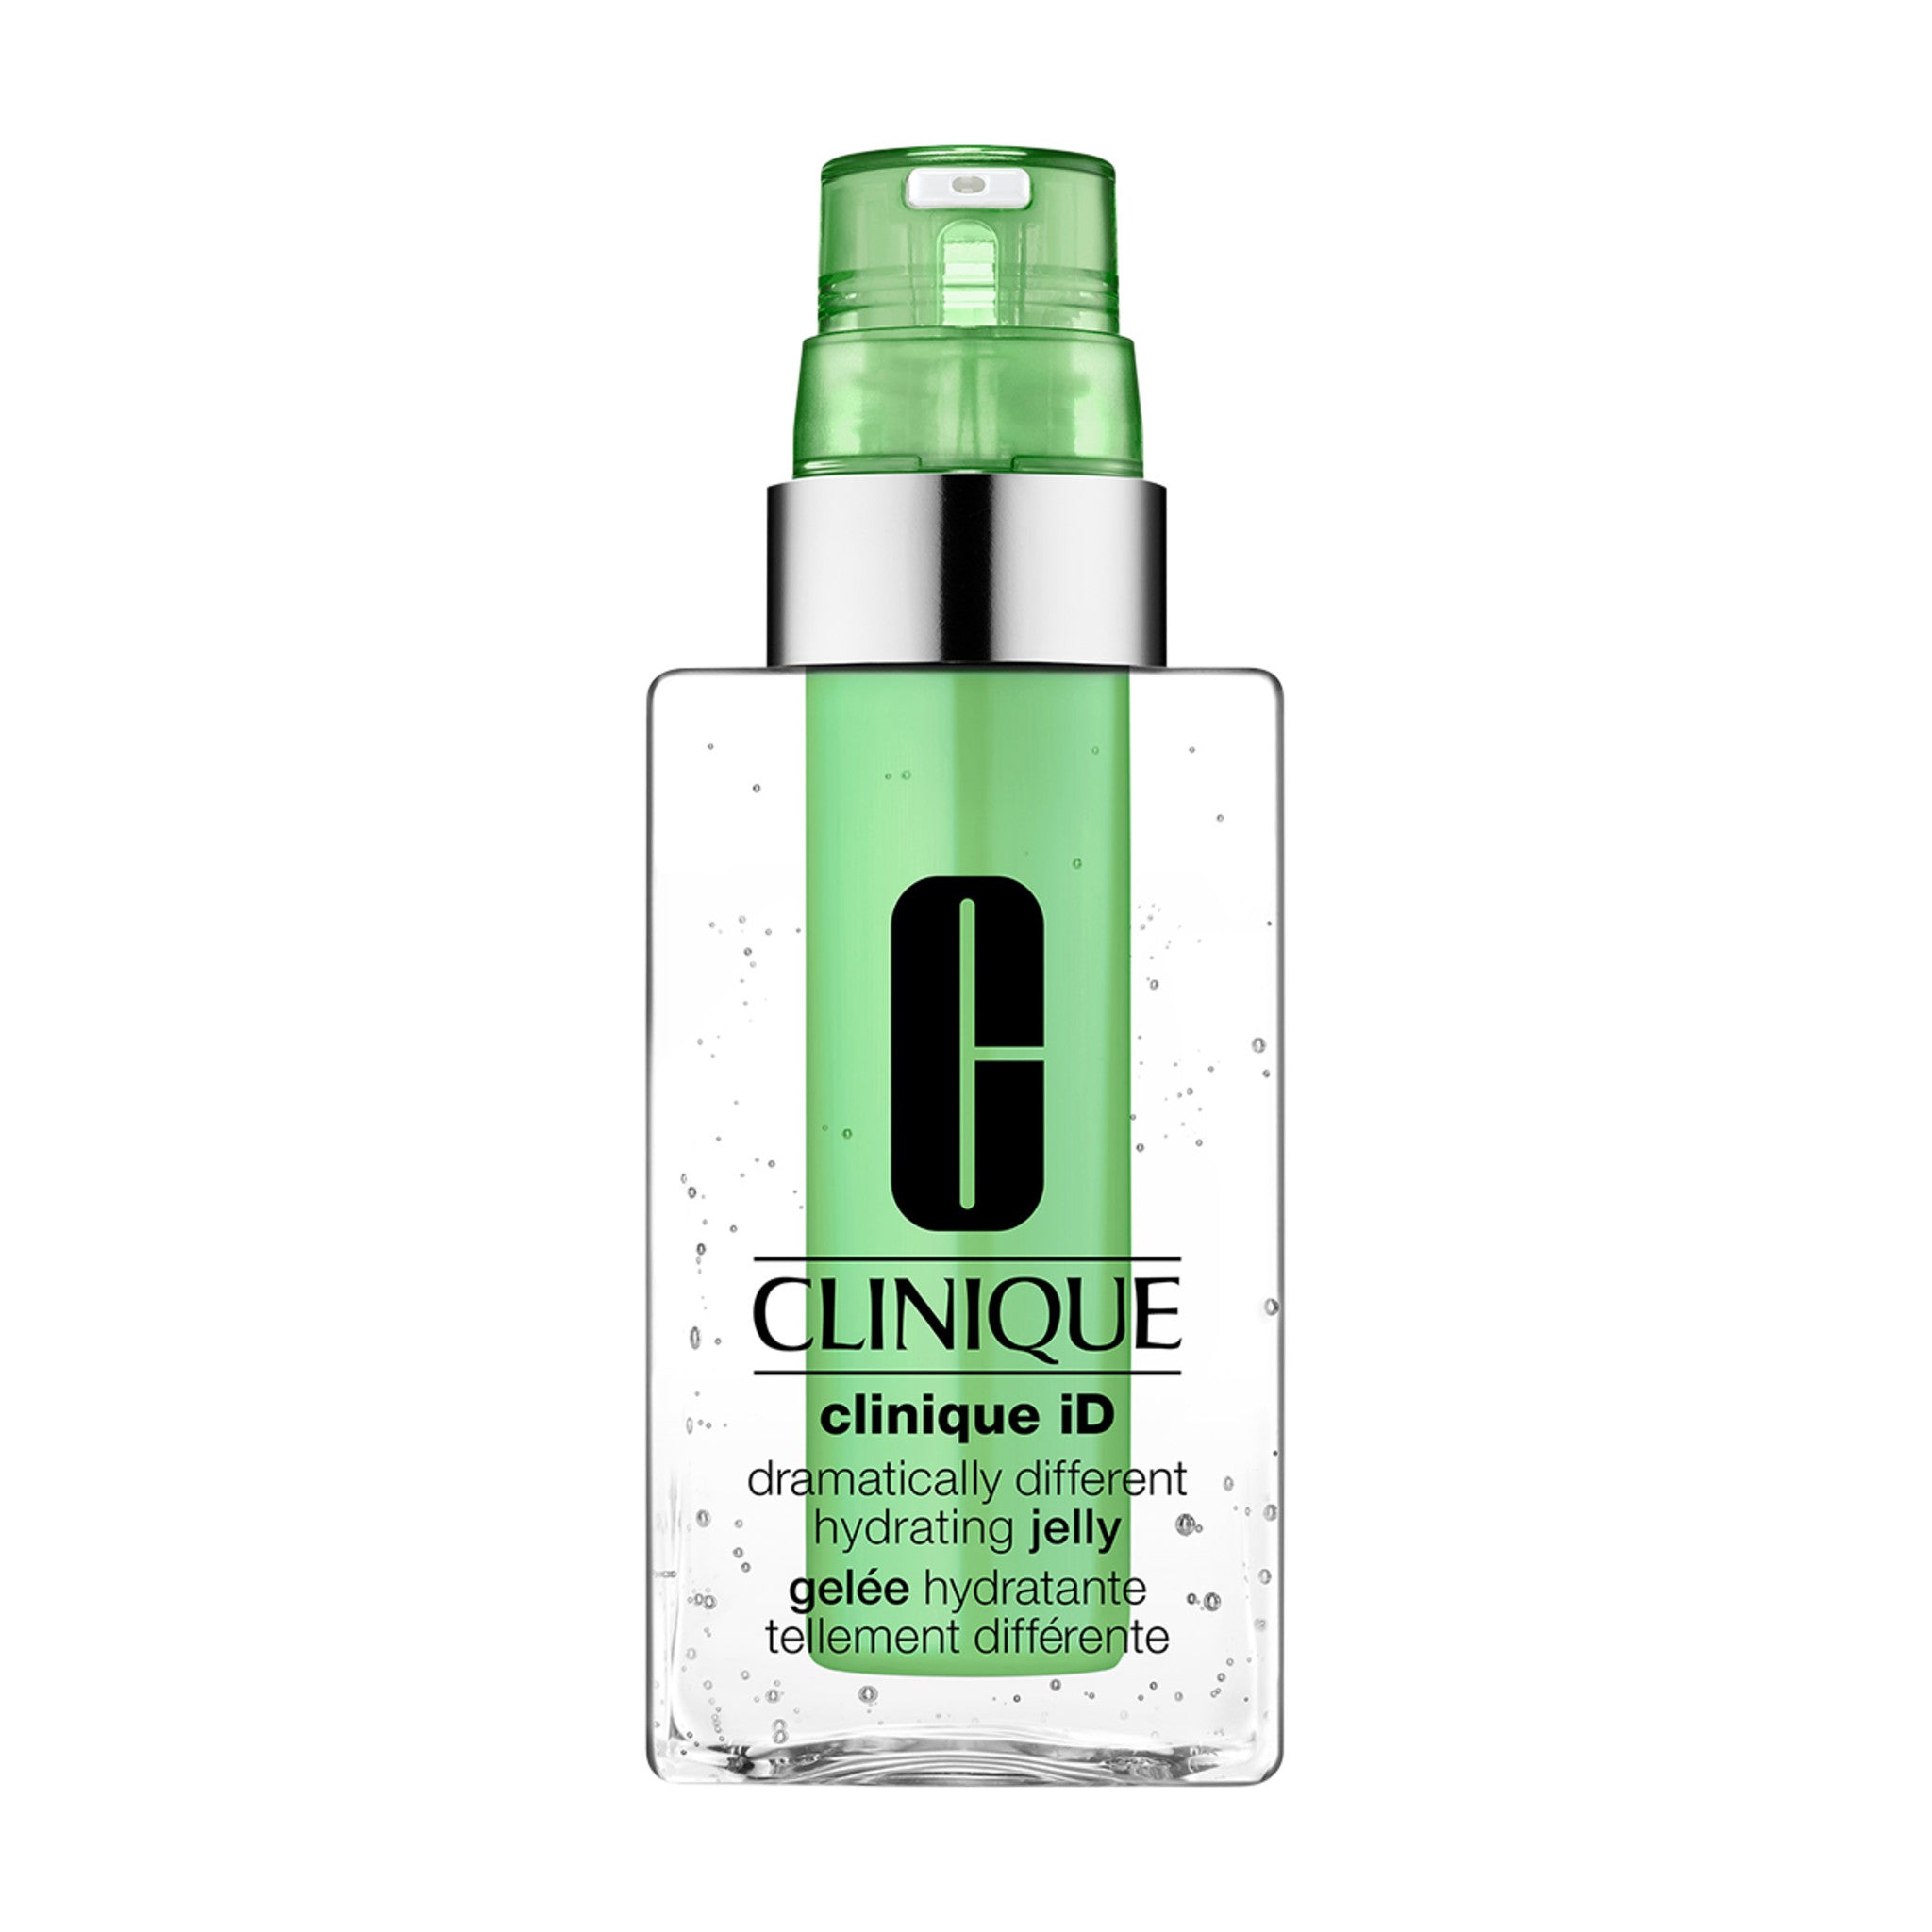 Clinique Clinique iD: Dramatically Different Hydrating Jelly and ACC for Irritation